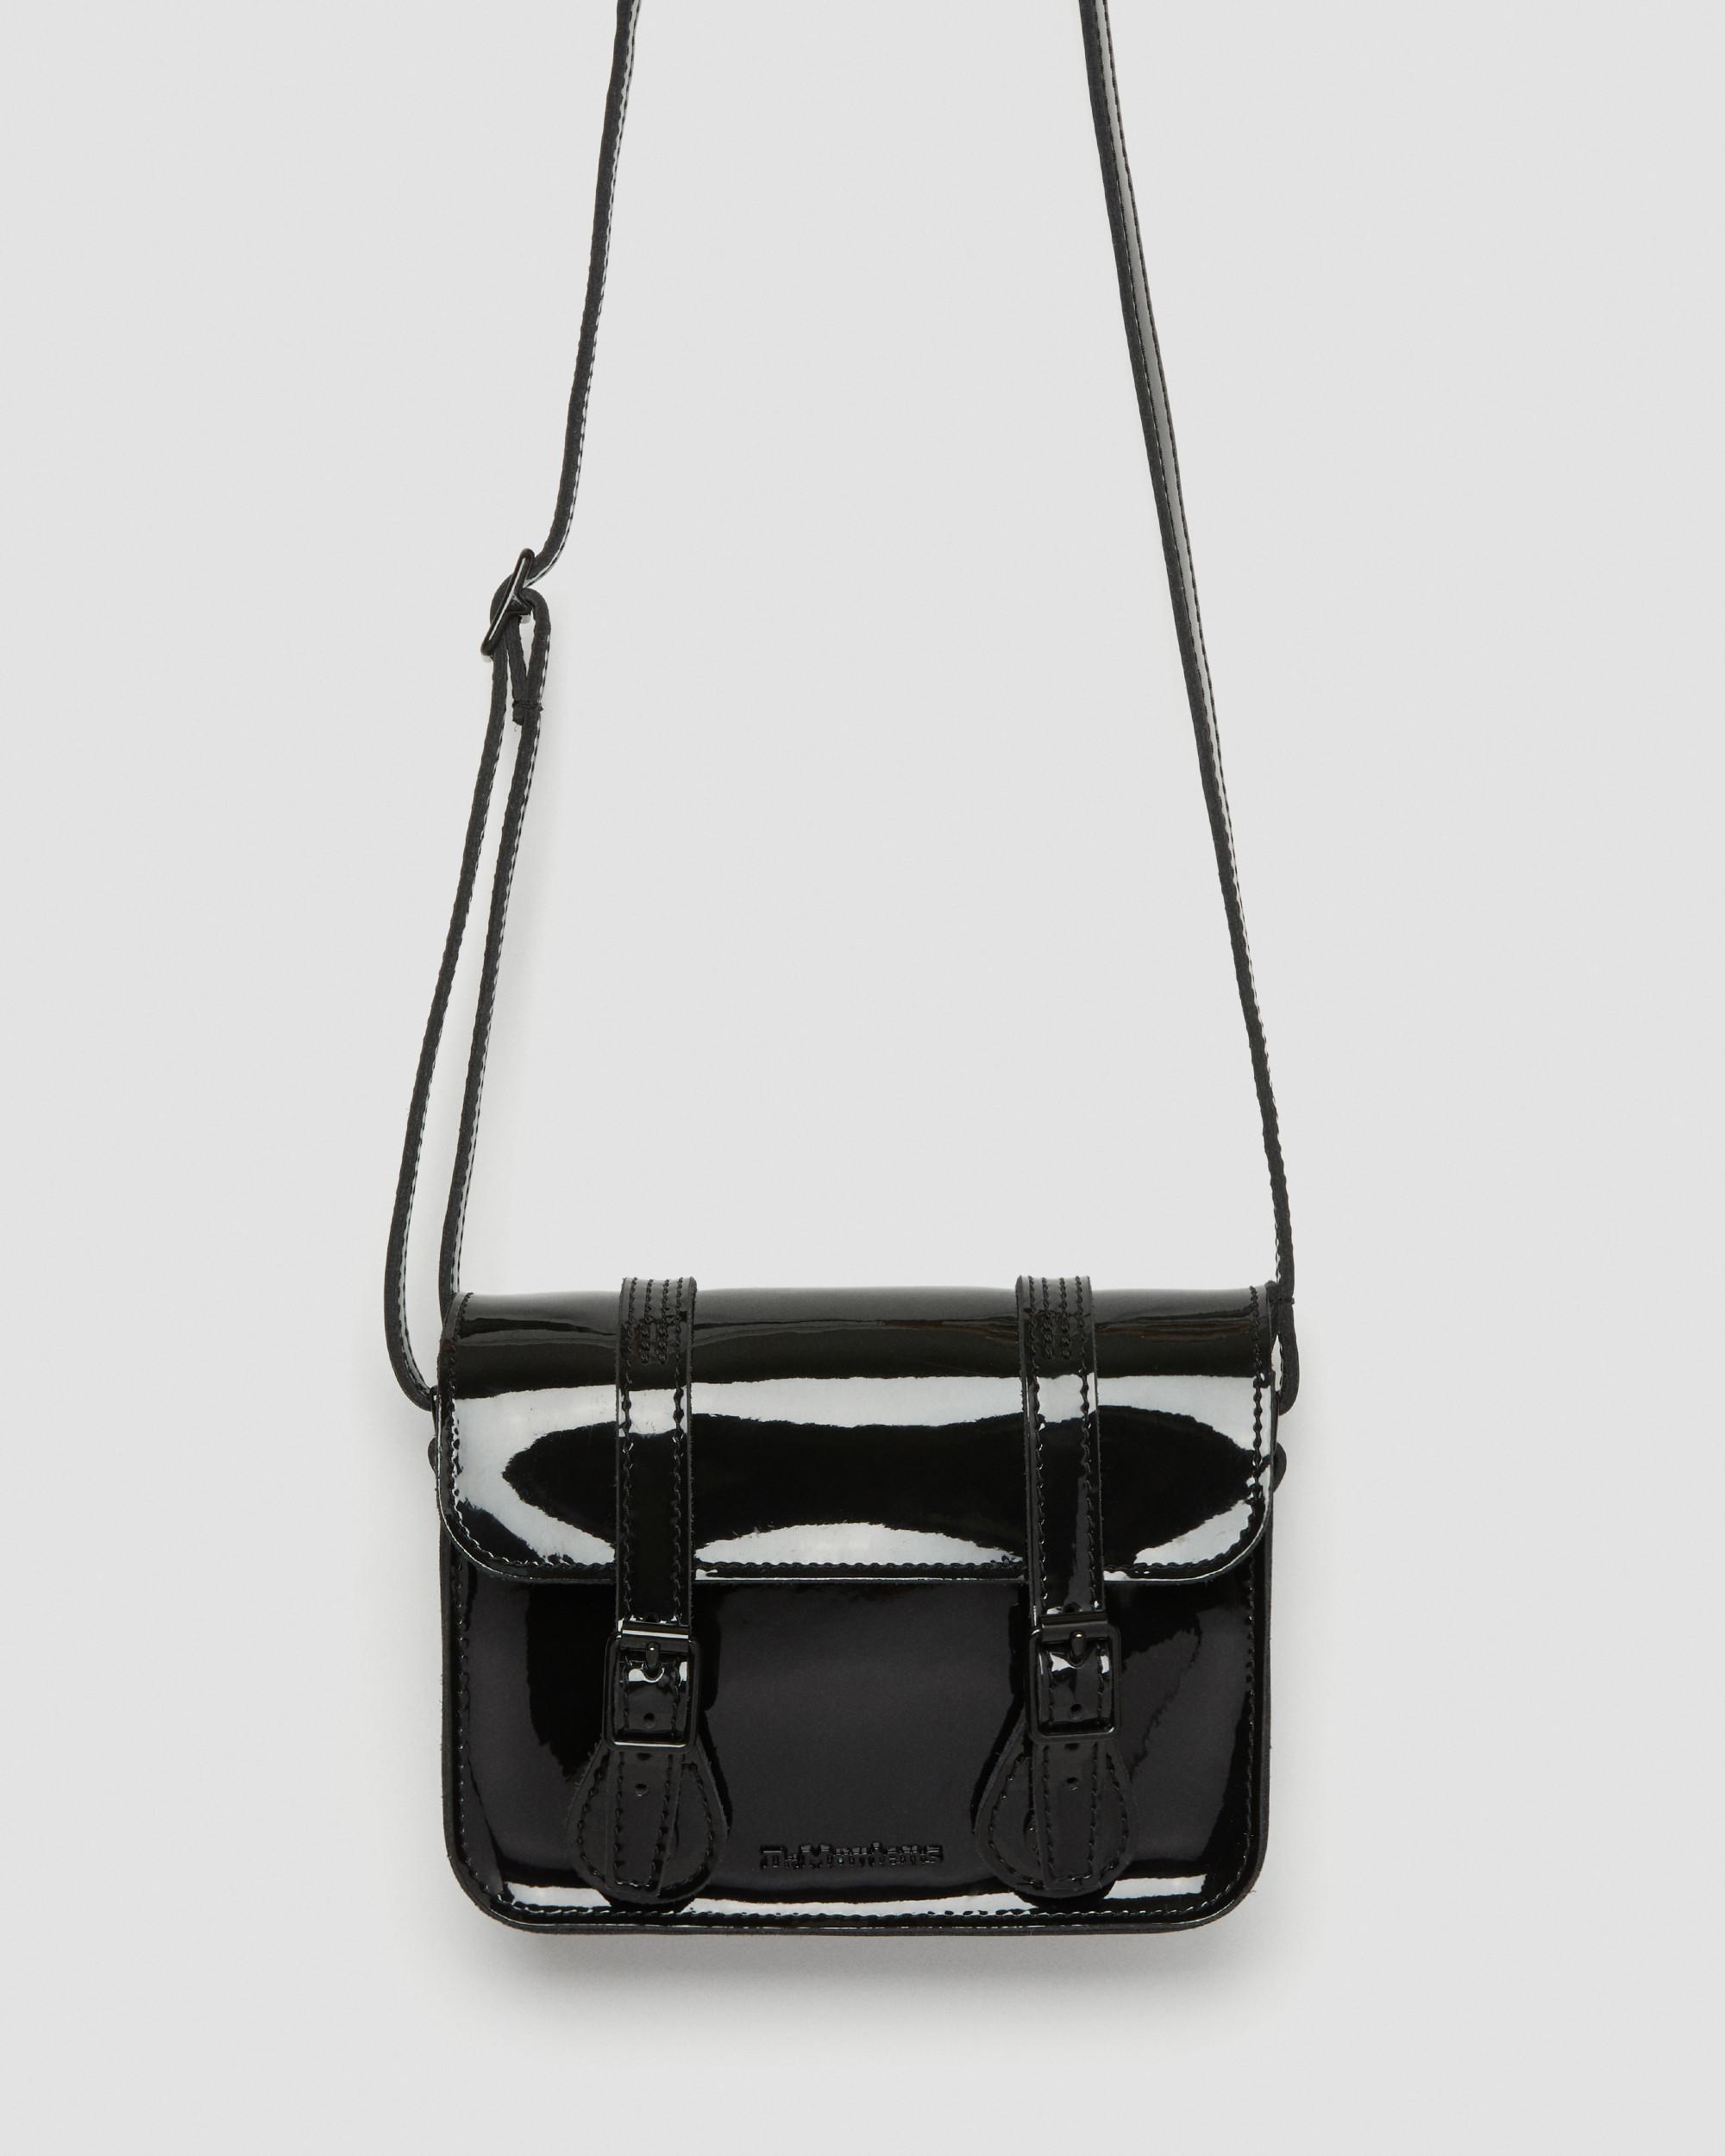 Dr. Martens, 7 inch Patent Leather Crossbody Camera Bag in Black